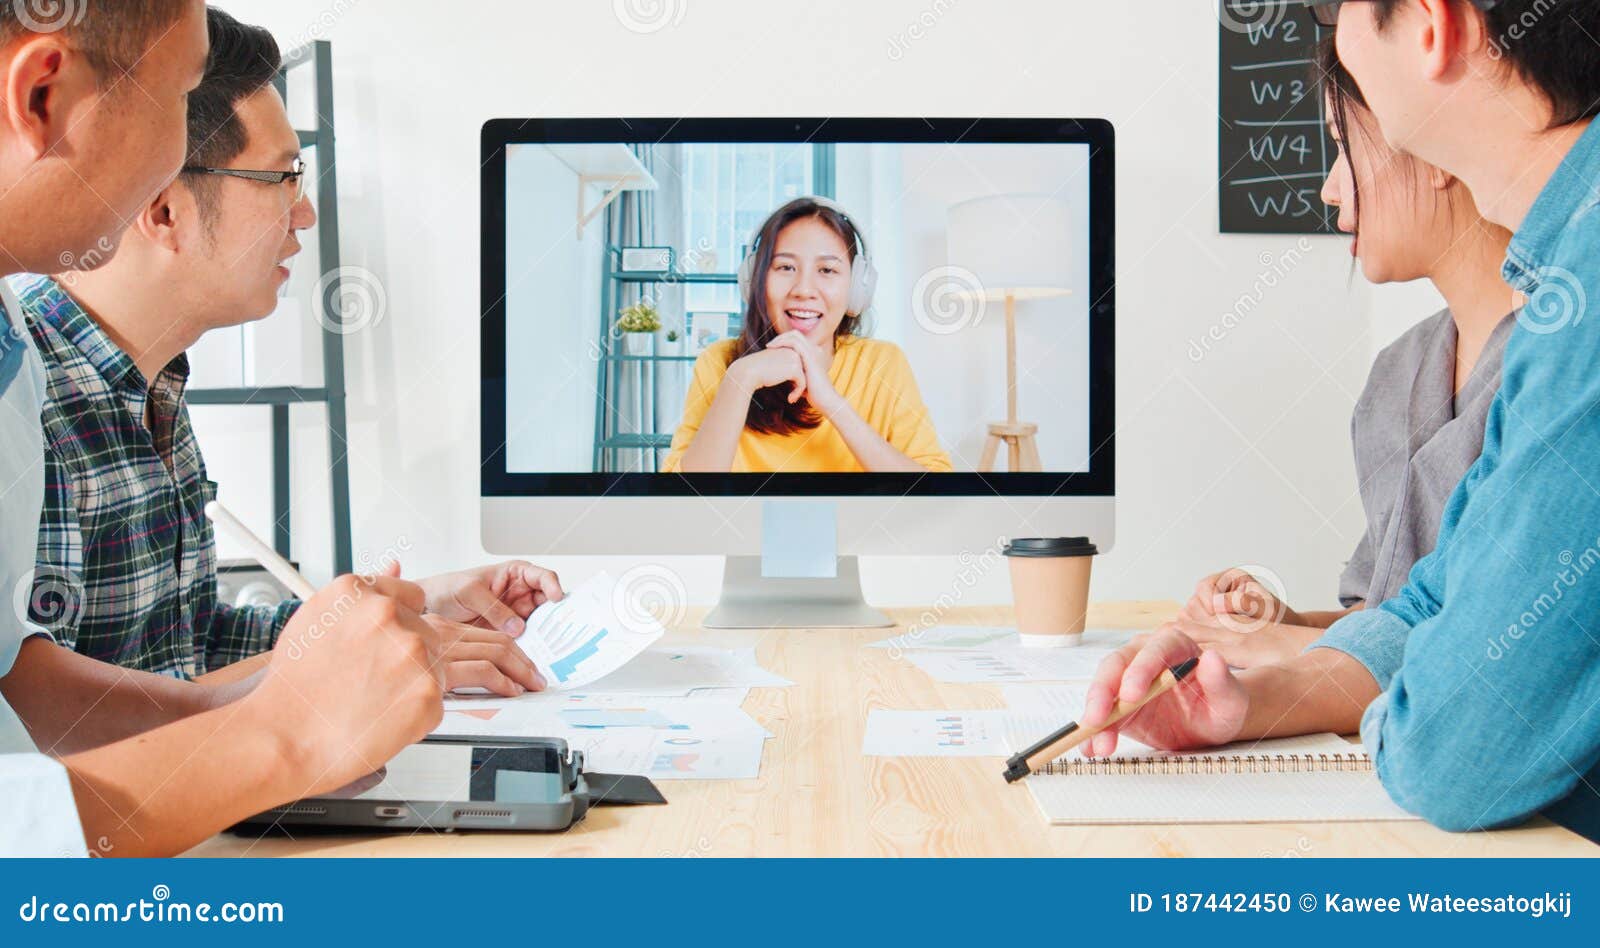 asian business people video conference with colleague woman. remote vdo call meeting, coworker teamwork brainstorm